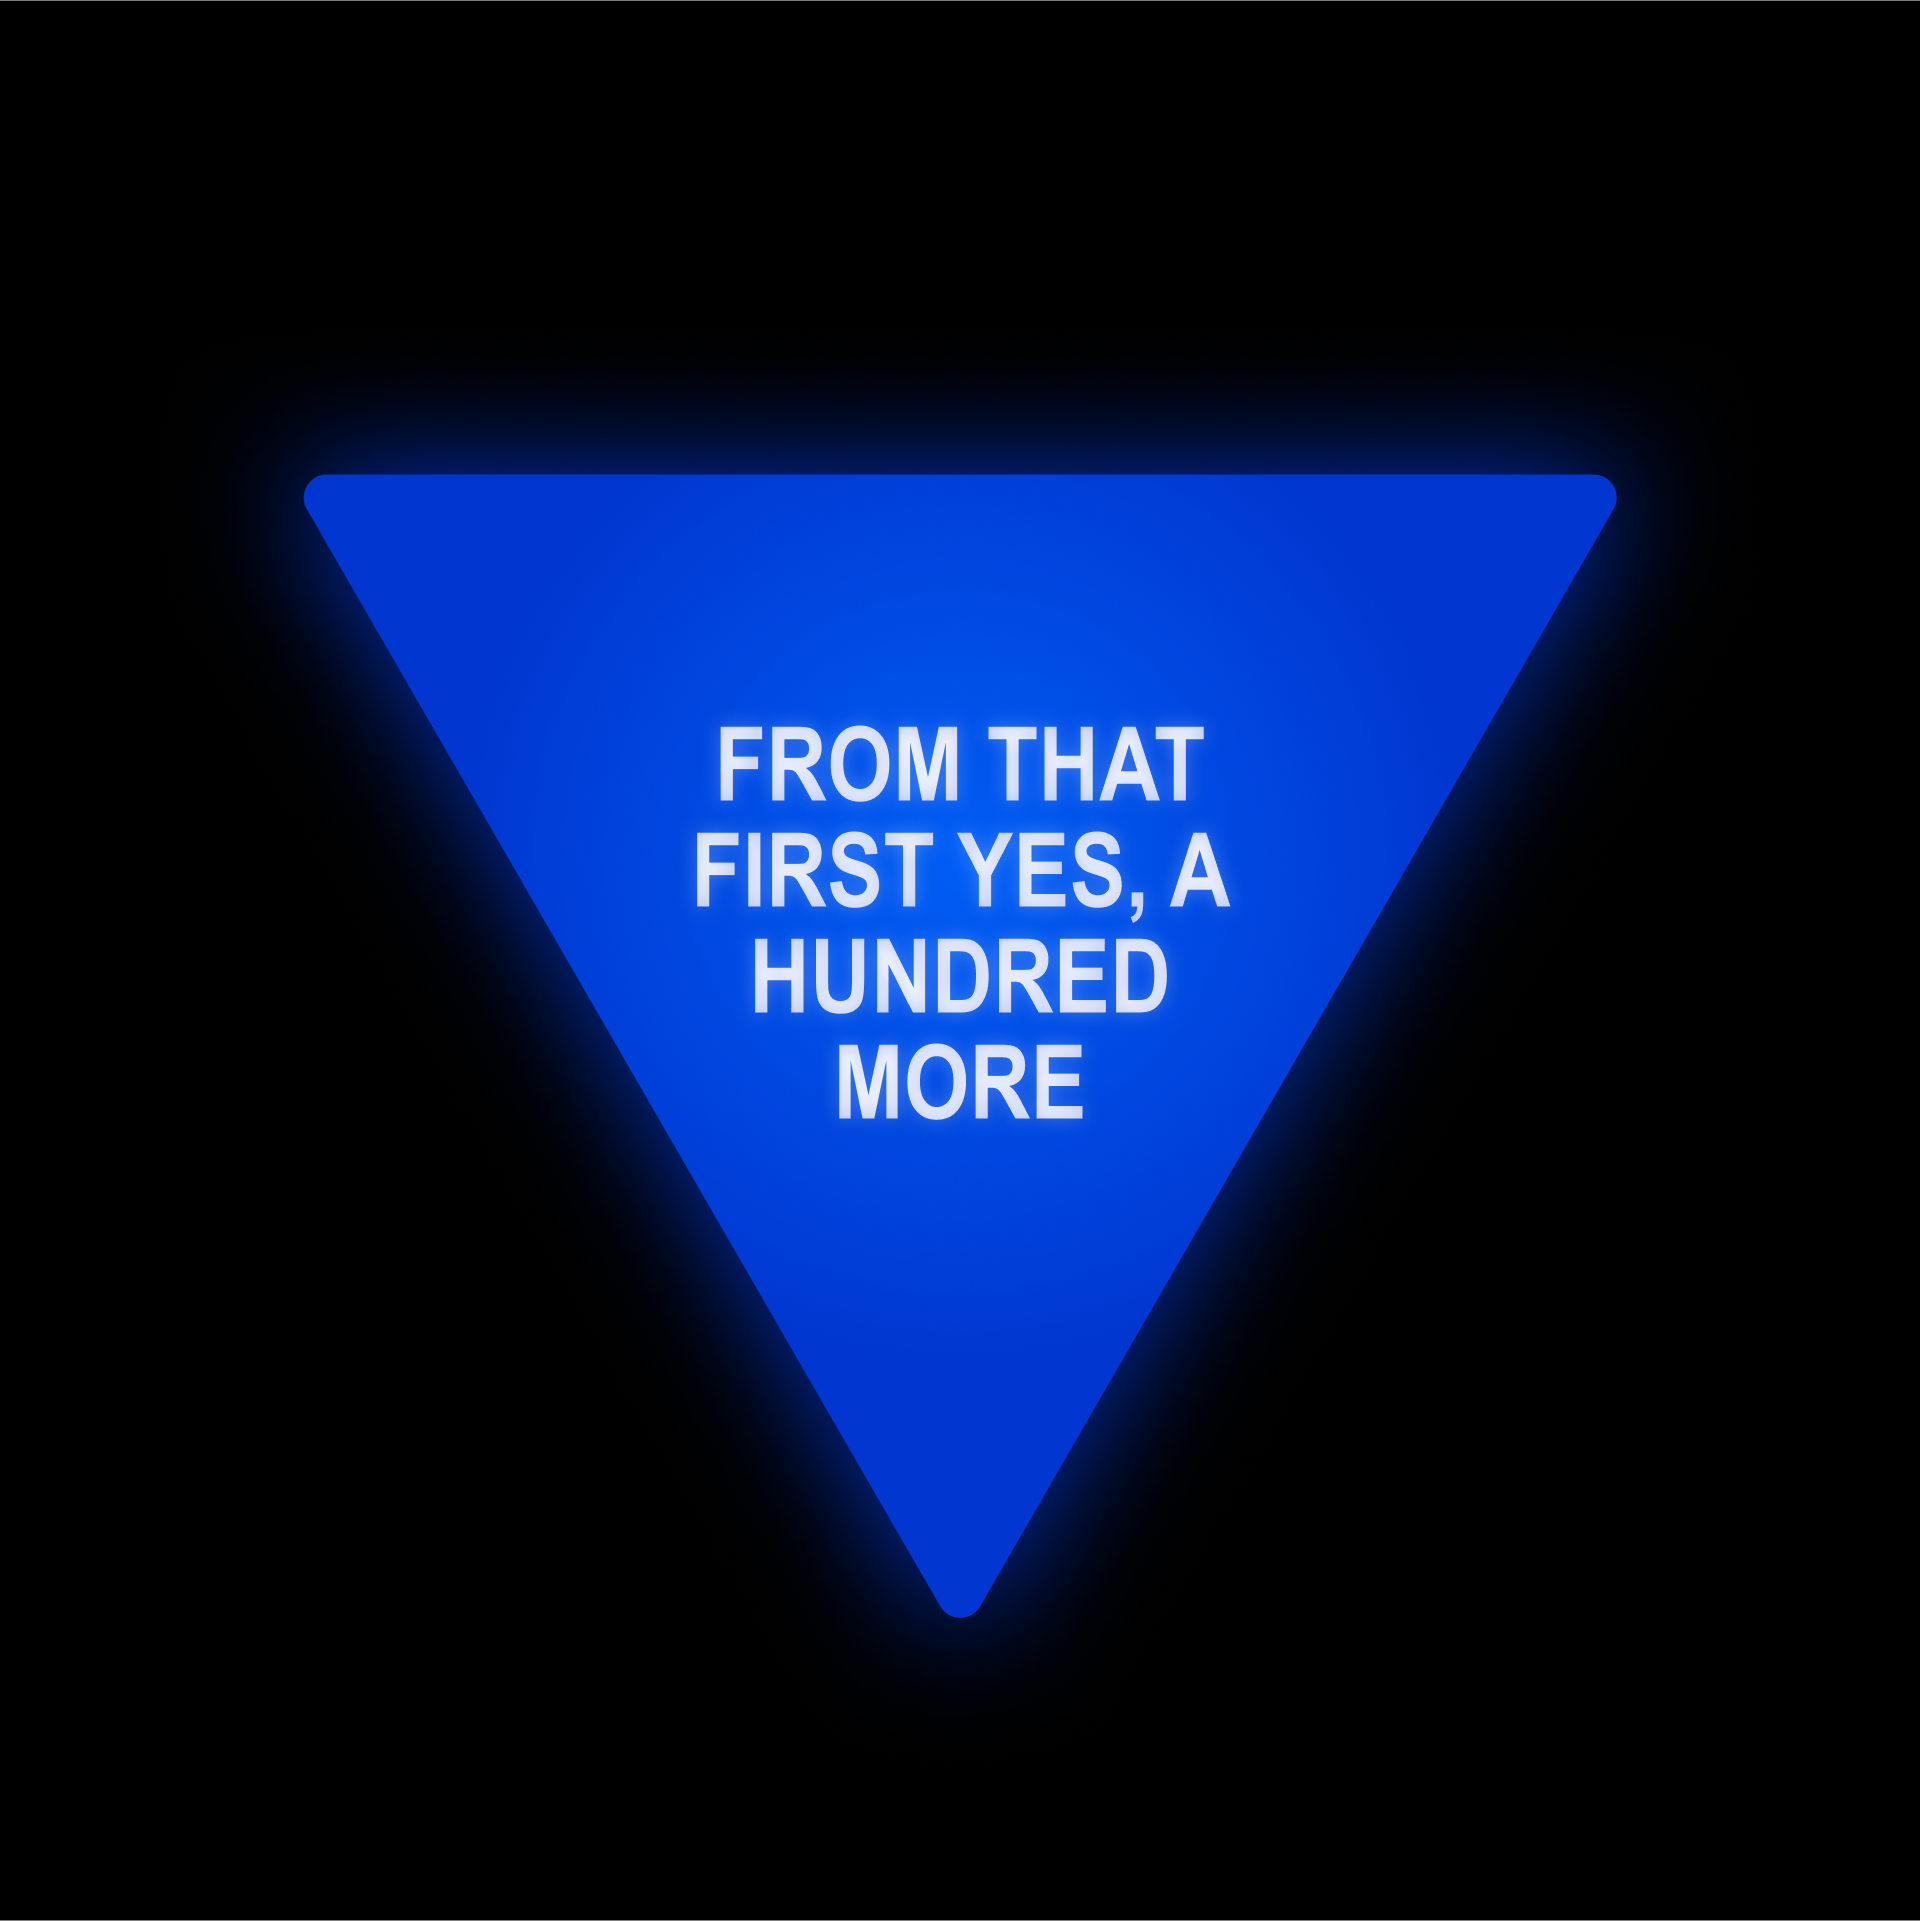 A glowing blue triangle floating in a black field bears the text "From the first yes, a hundred more"